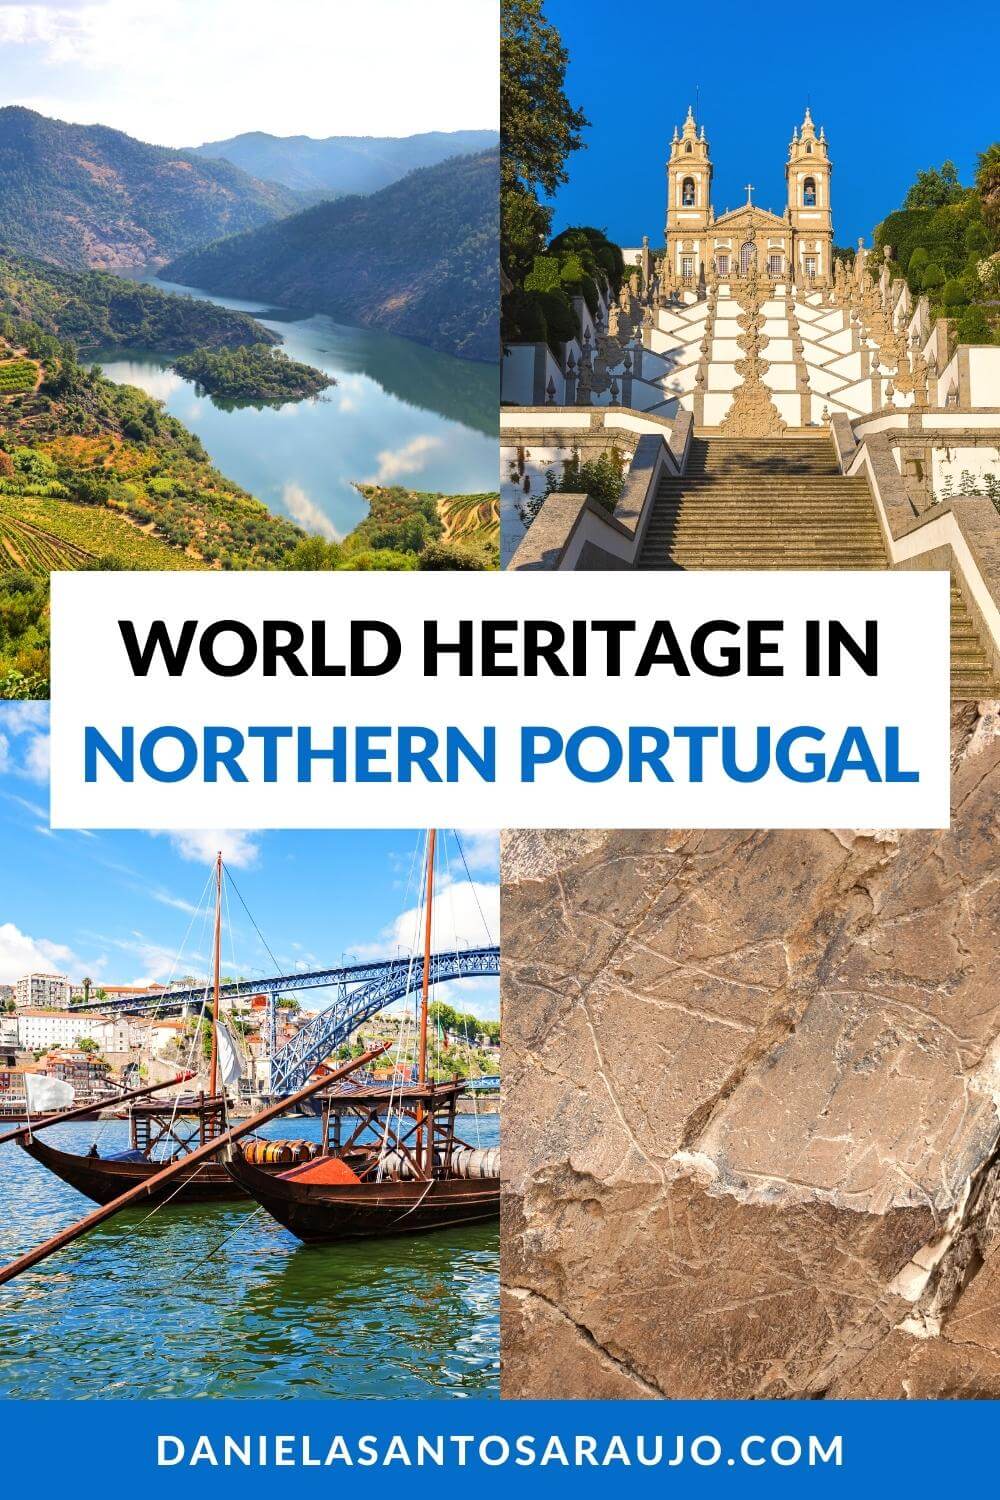 World Heritage in Northern Portugal